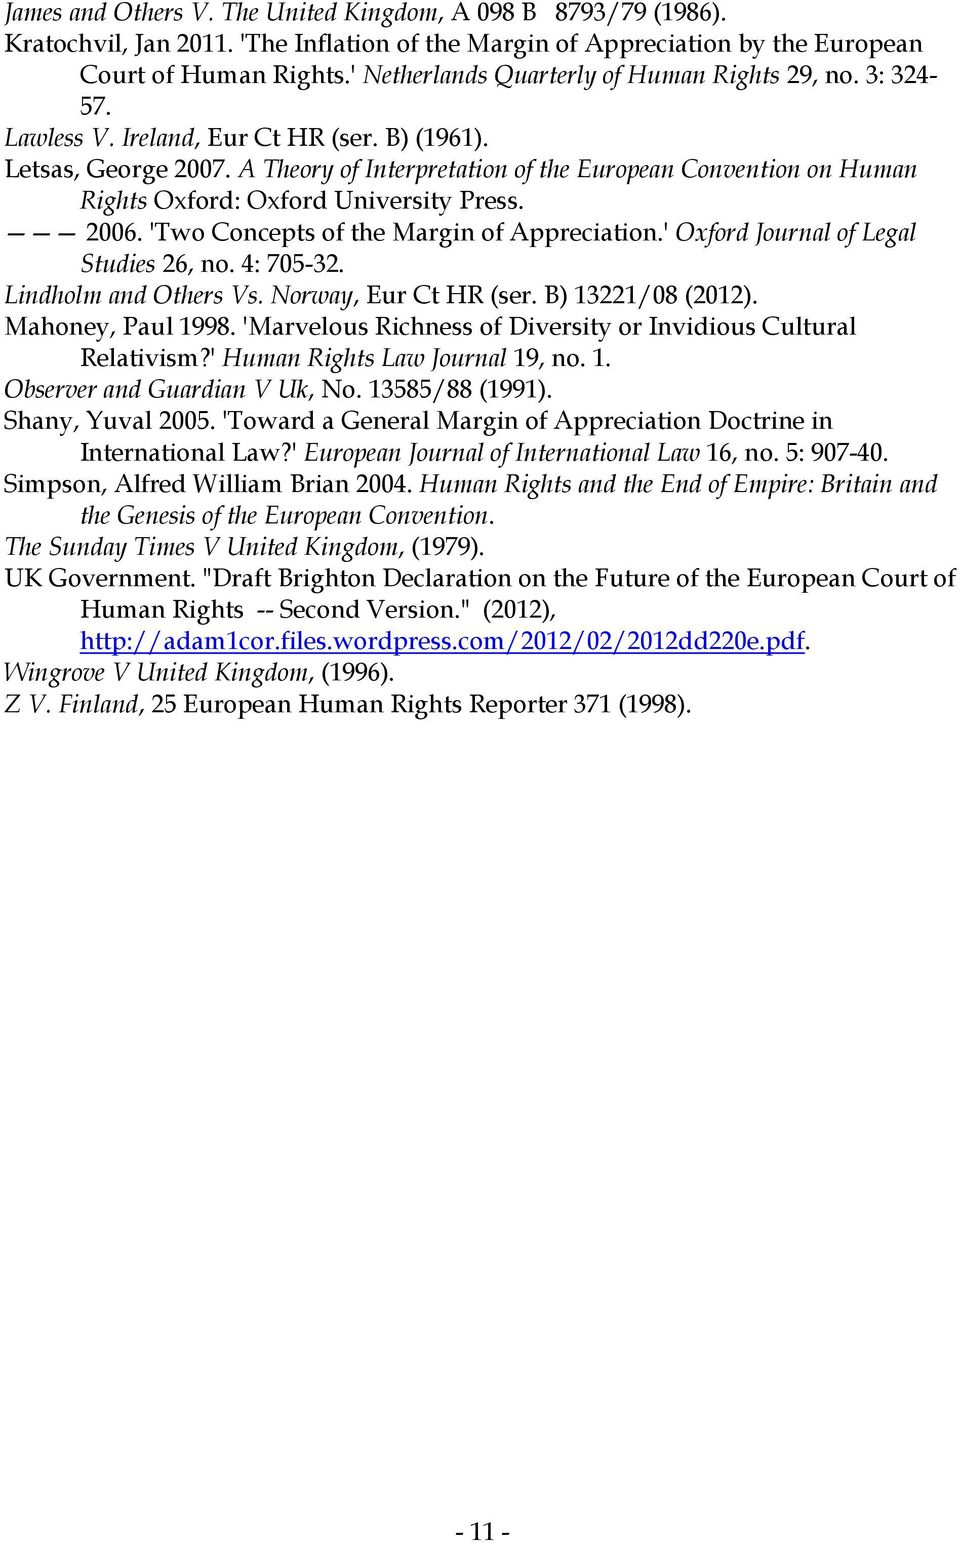 A Theory of Interpretation of the European Convention on Human Rights Oxford: Oxford University Press. 2006. 'Two Concepts of the Margin of Appreciation.' Oxford Journal of Legal Studies 26, no.